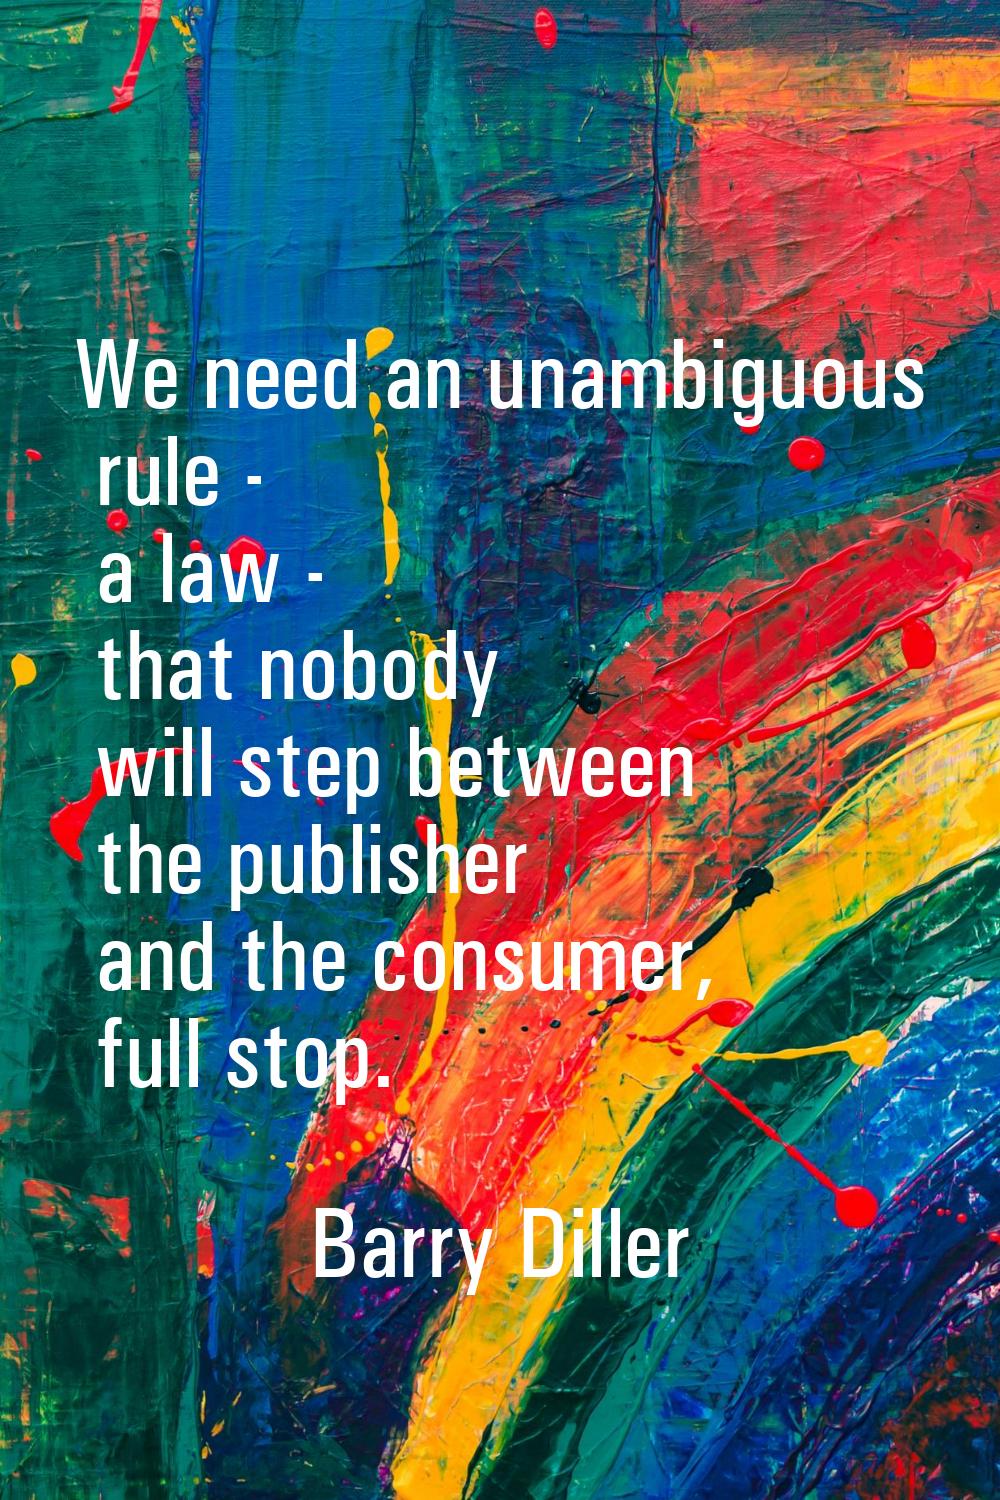 We need an unambiguous rule - a law - that nobody will step between the publisher and the consumer,